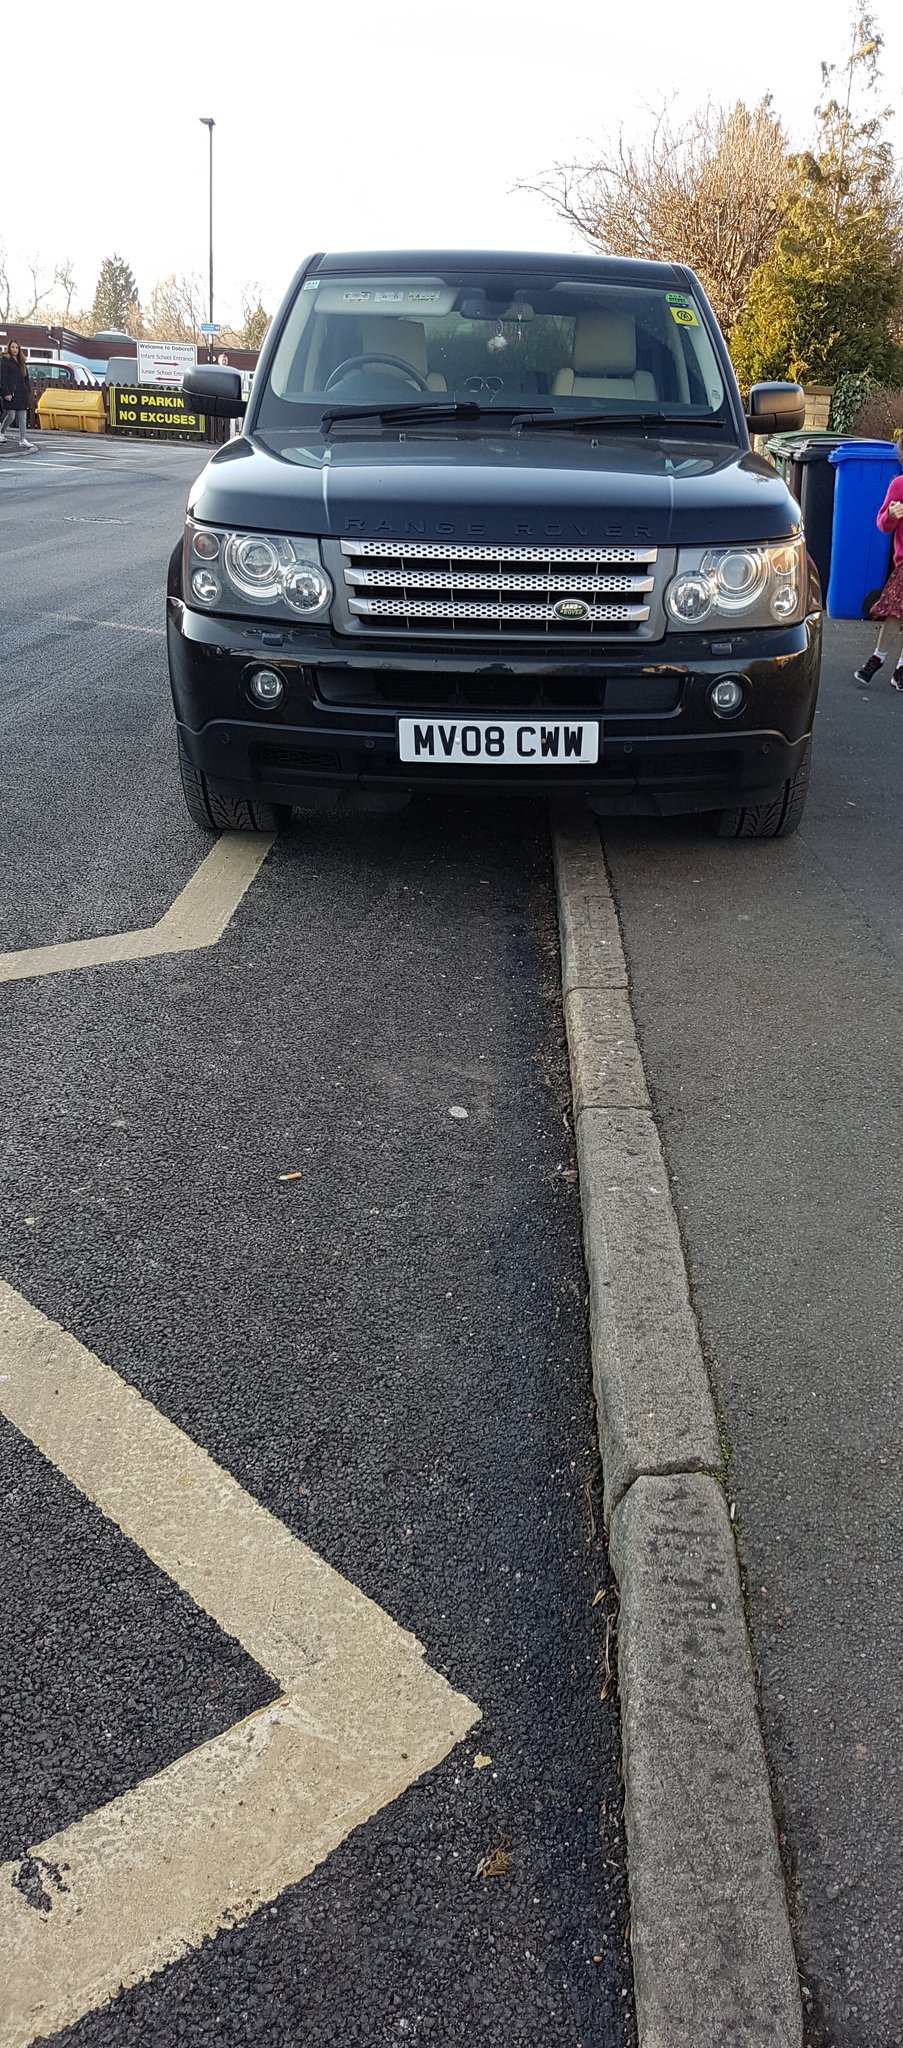 MV08 CWW is an Inconsiderate Parker